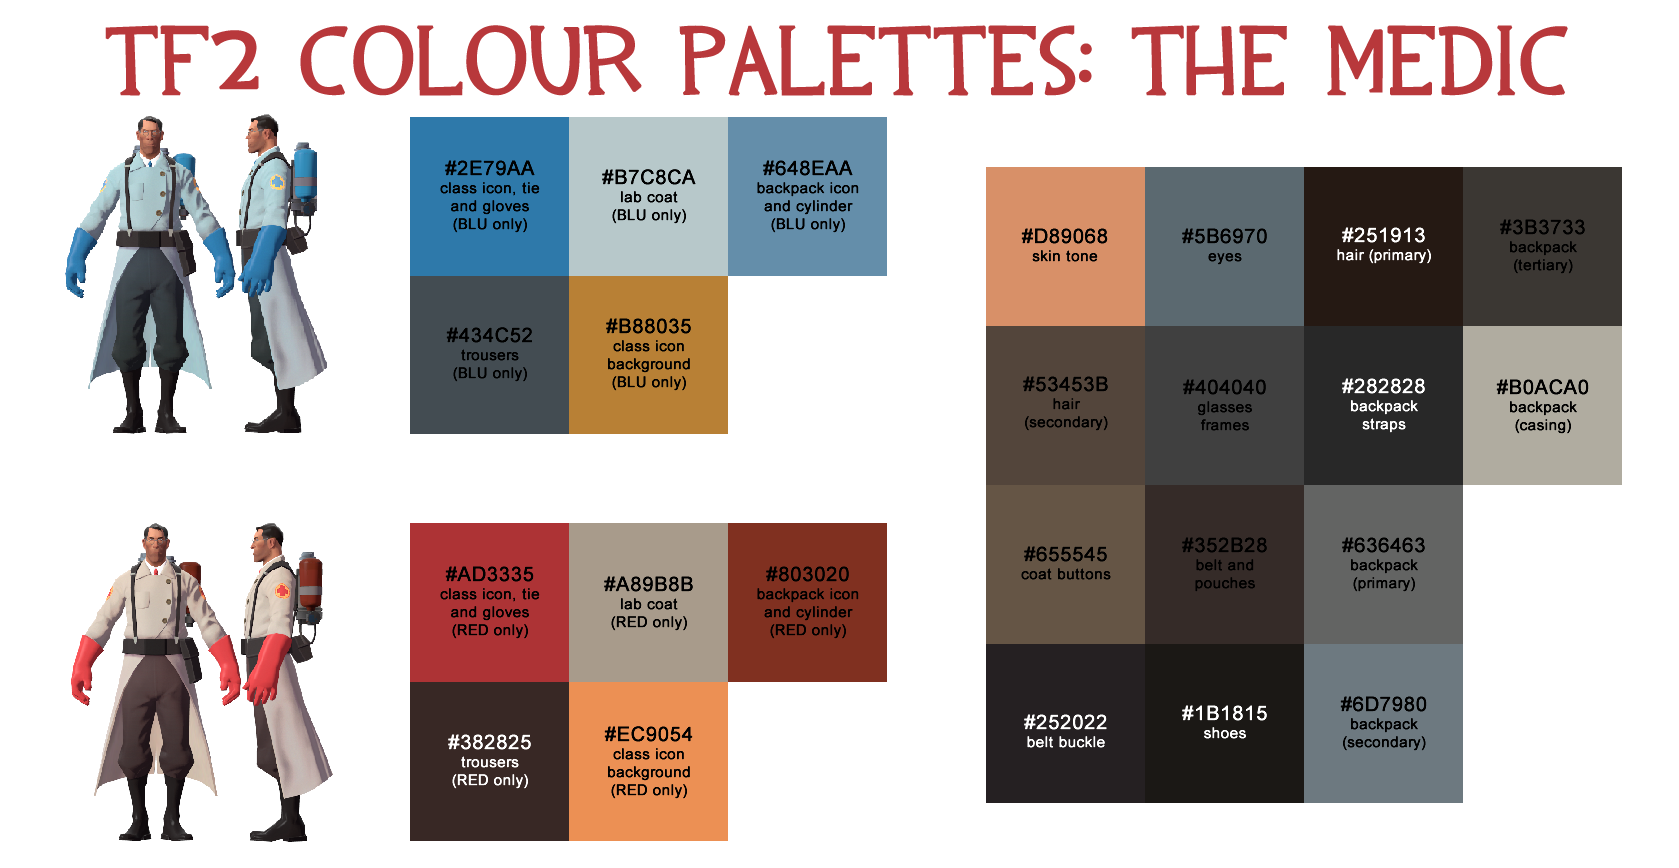 Tf2 items. Tf2 Color Palette.